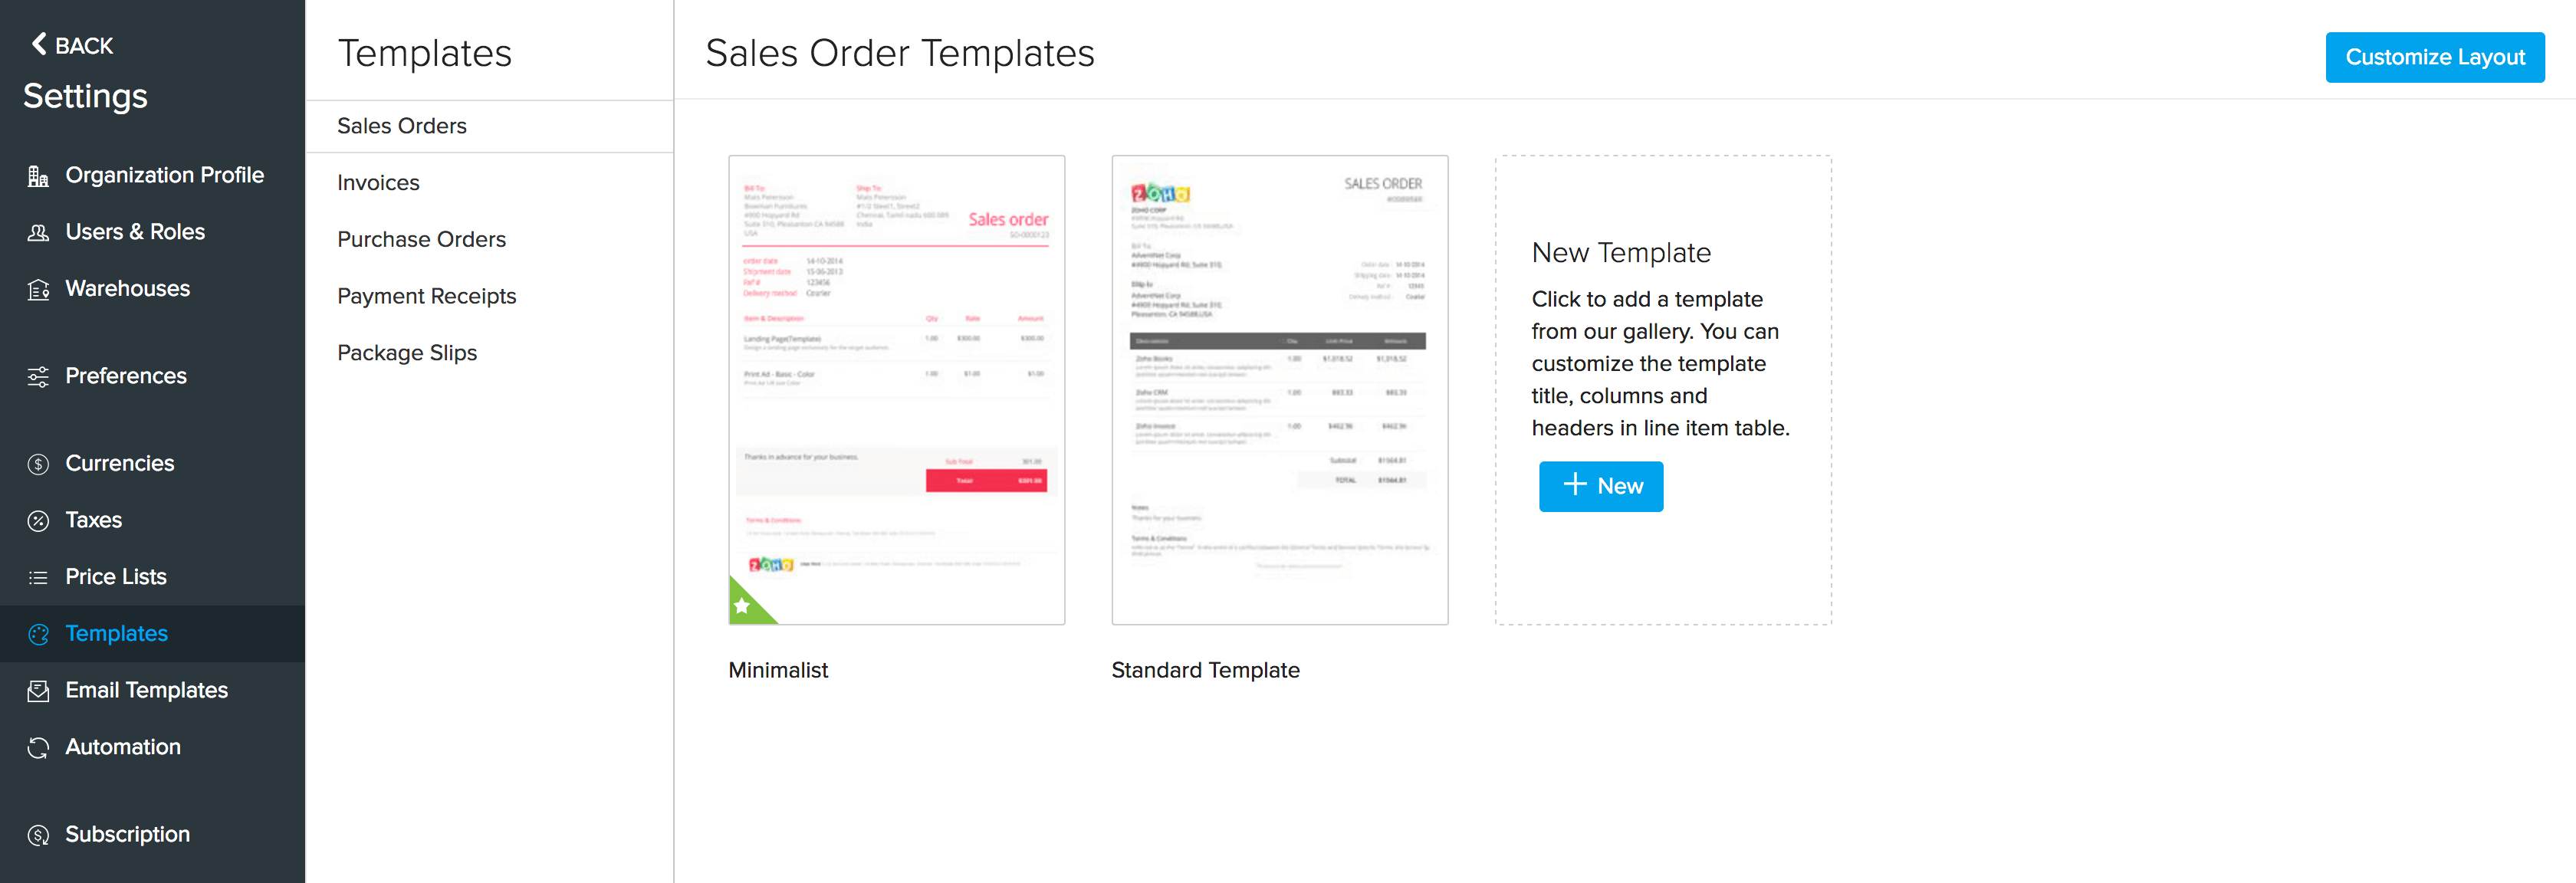 Templates page